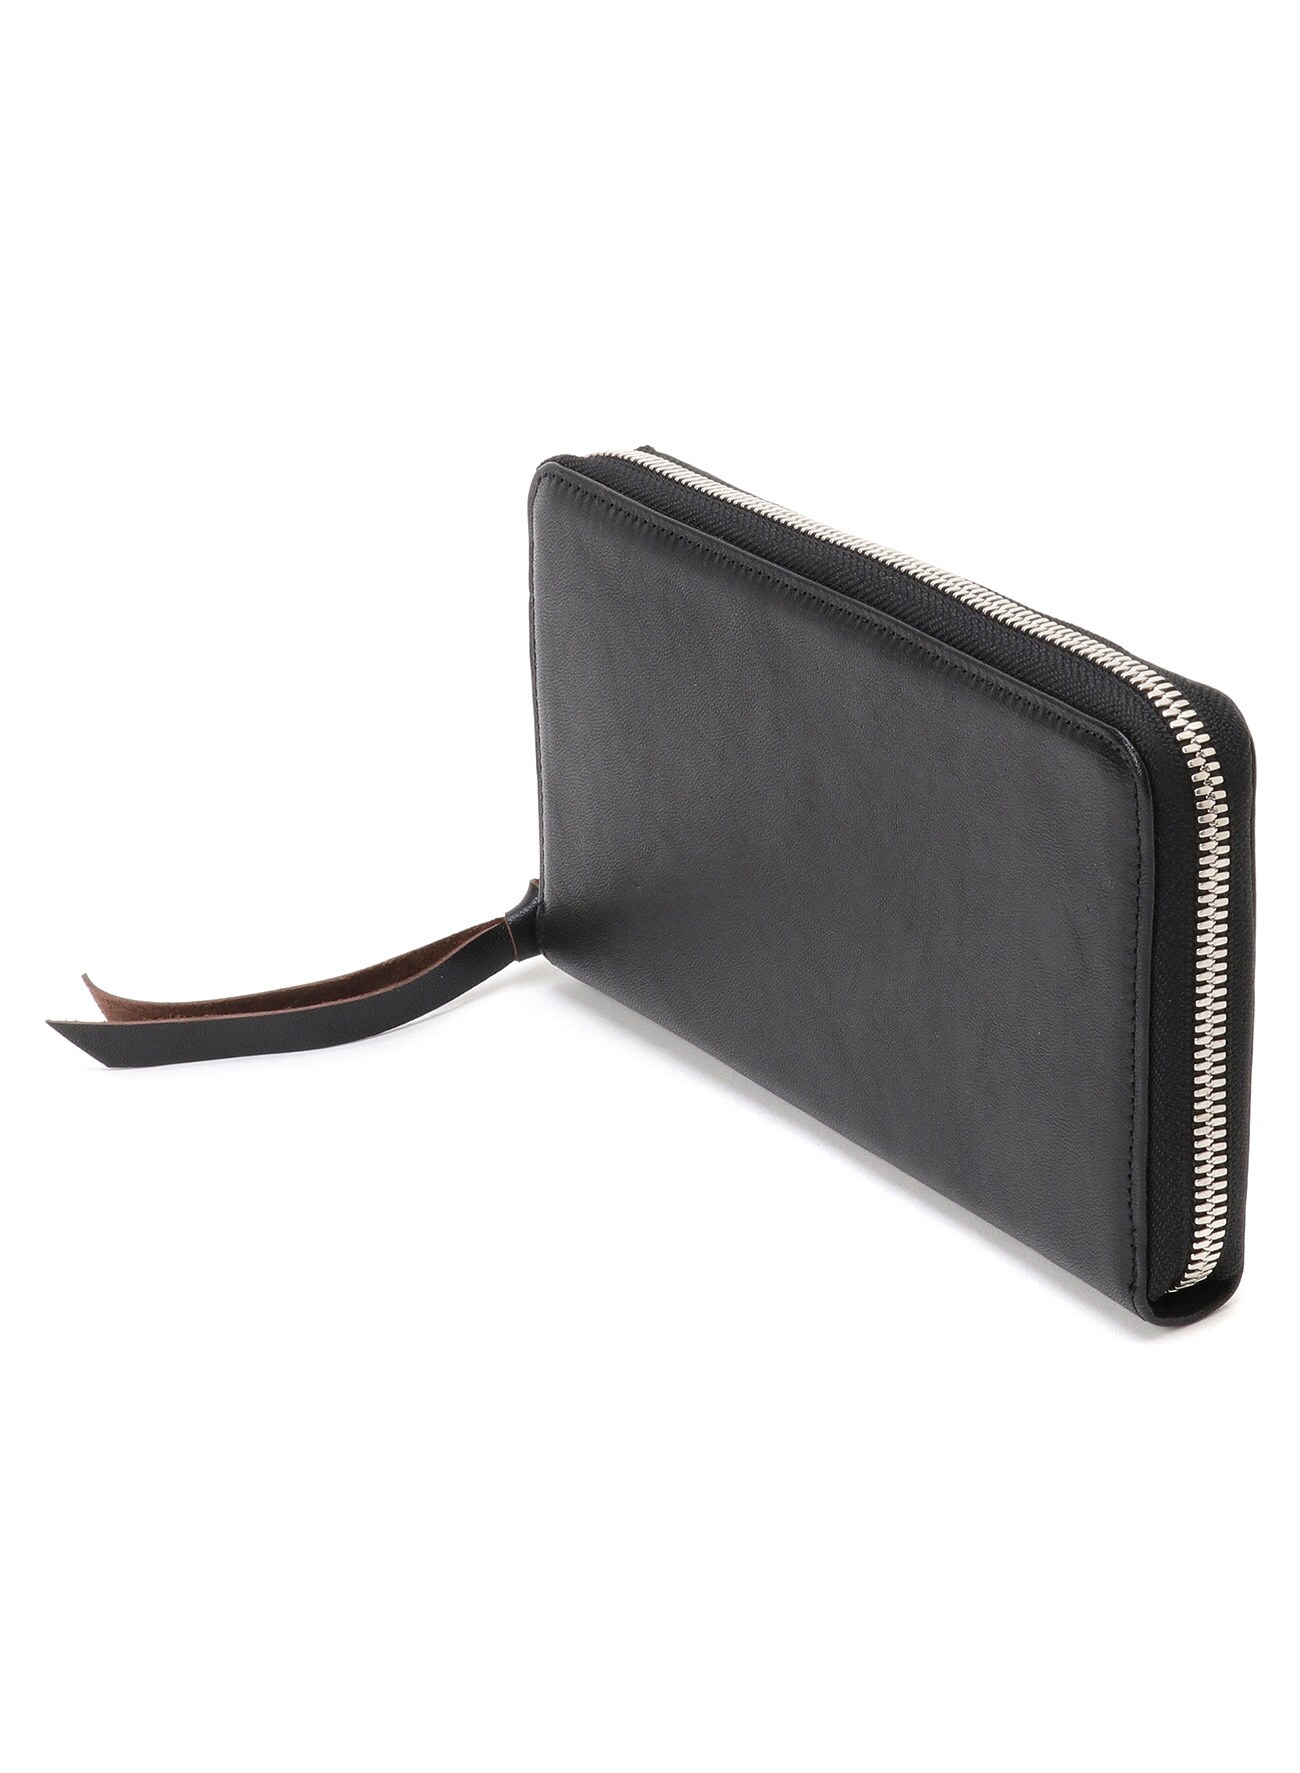 HORSE LEATHER THREE SIDE OPEN LONG WALLET